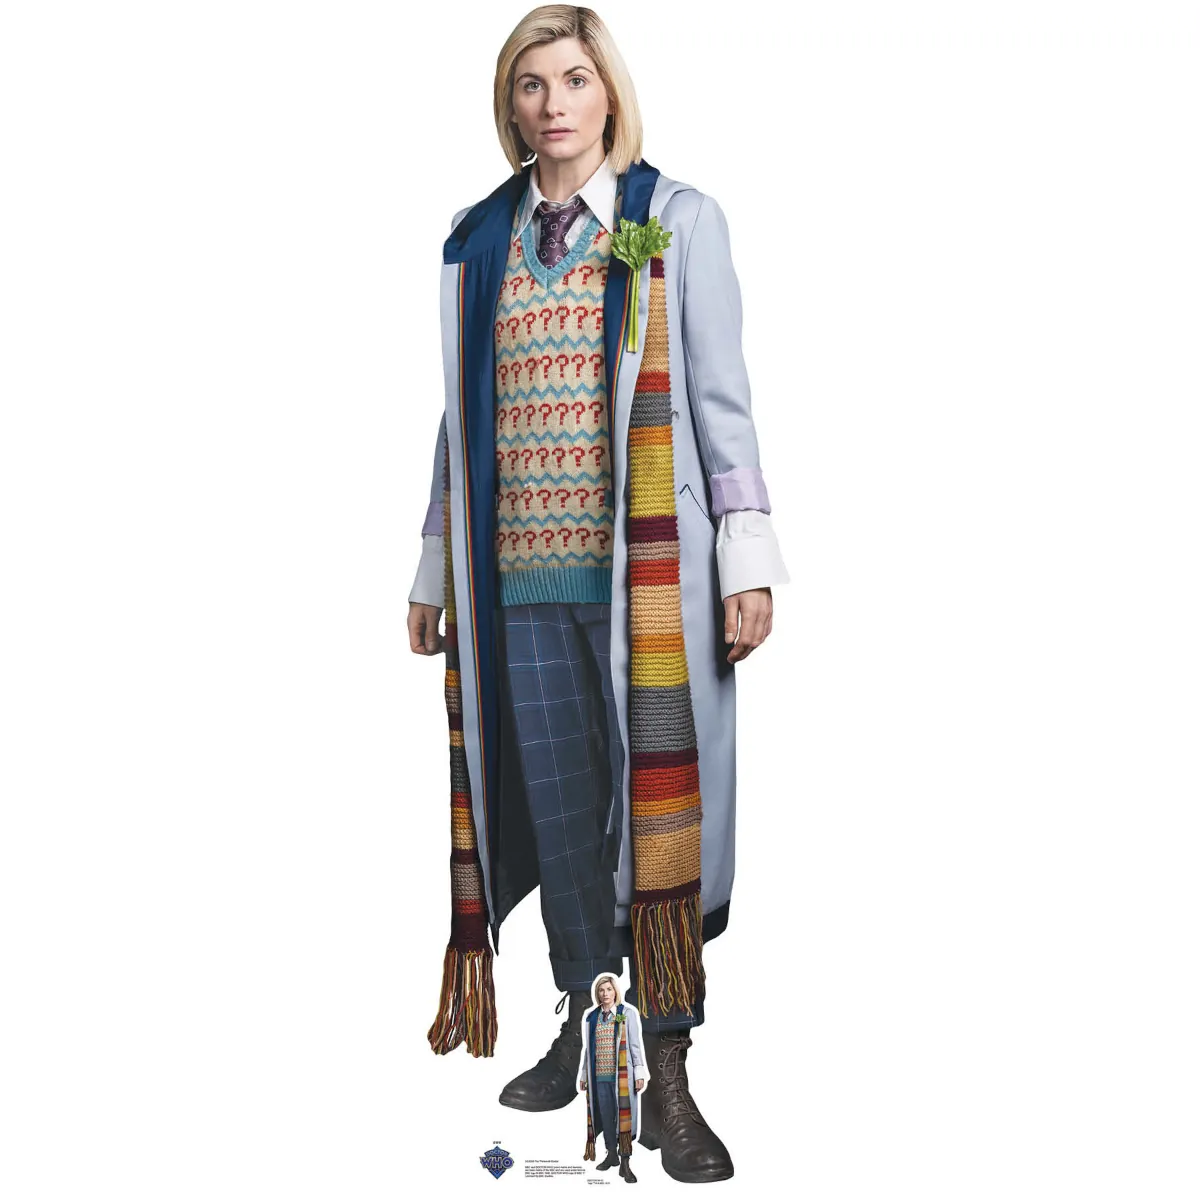 SC4229 The Thirteenth Doctor 'Jodie Whittaker' (Doctor Who) Lifesize + Mini Cardboard Cutout Standee Front